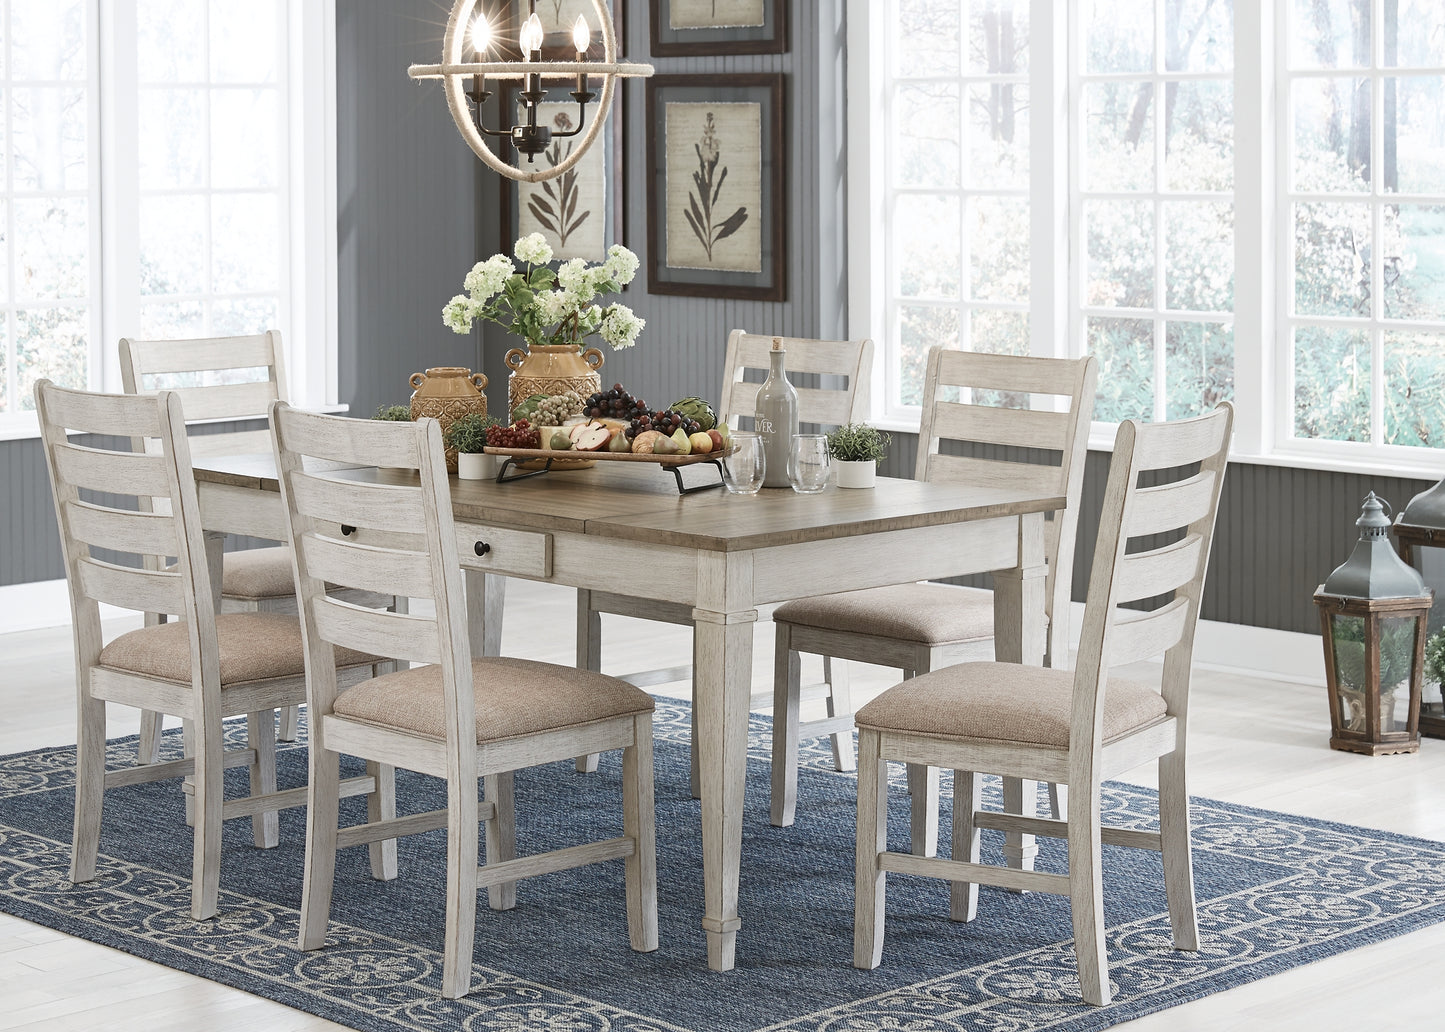 Skempton Dining Table and 6 Chairs Wilson Furniture (OH)  in Bridgeport, Ohio. Serving Bridgeport, Yorkville, Bellaire, & Avondale